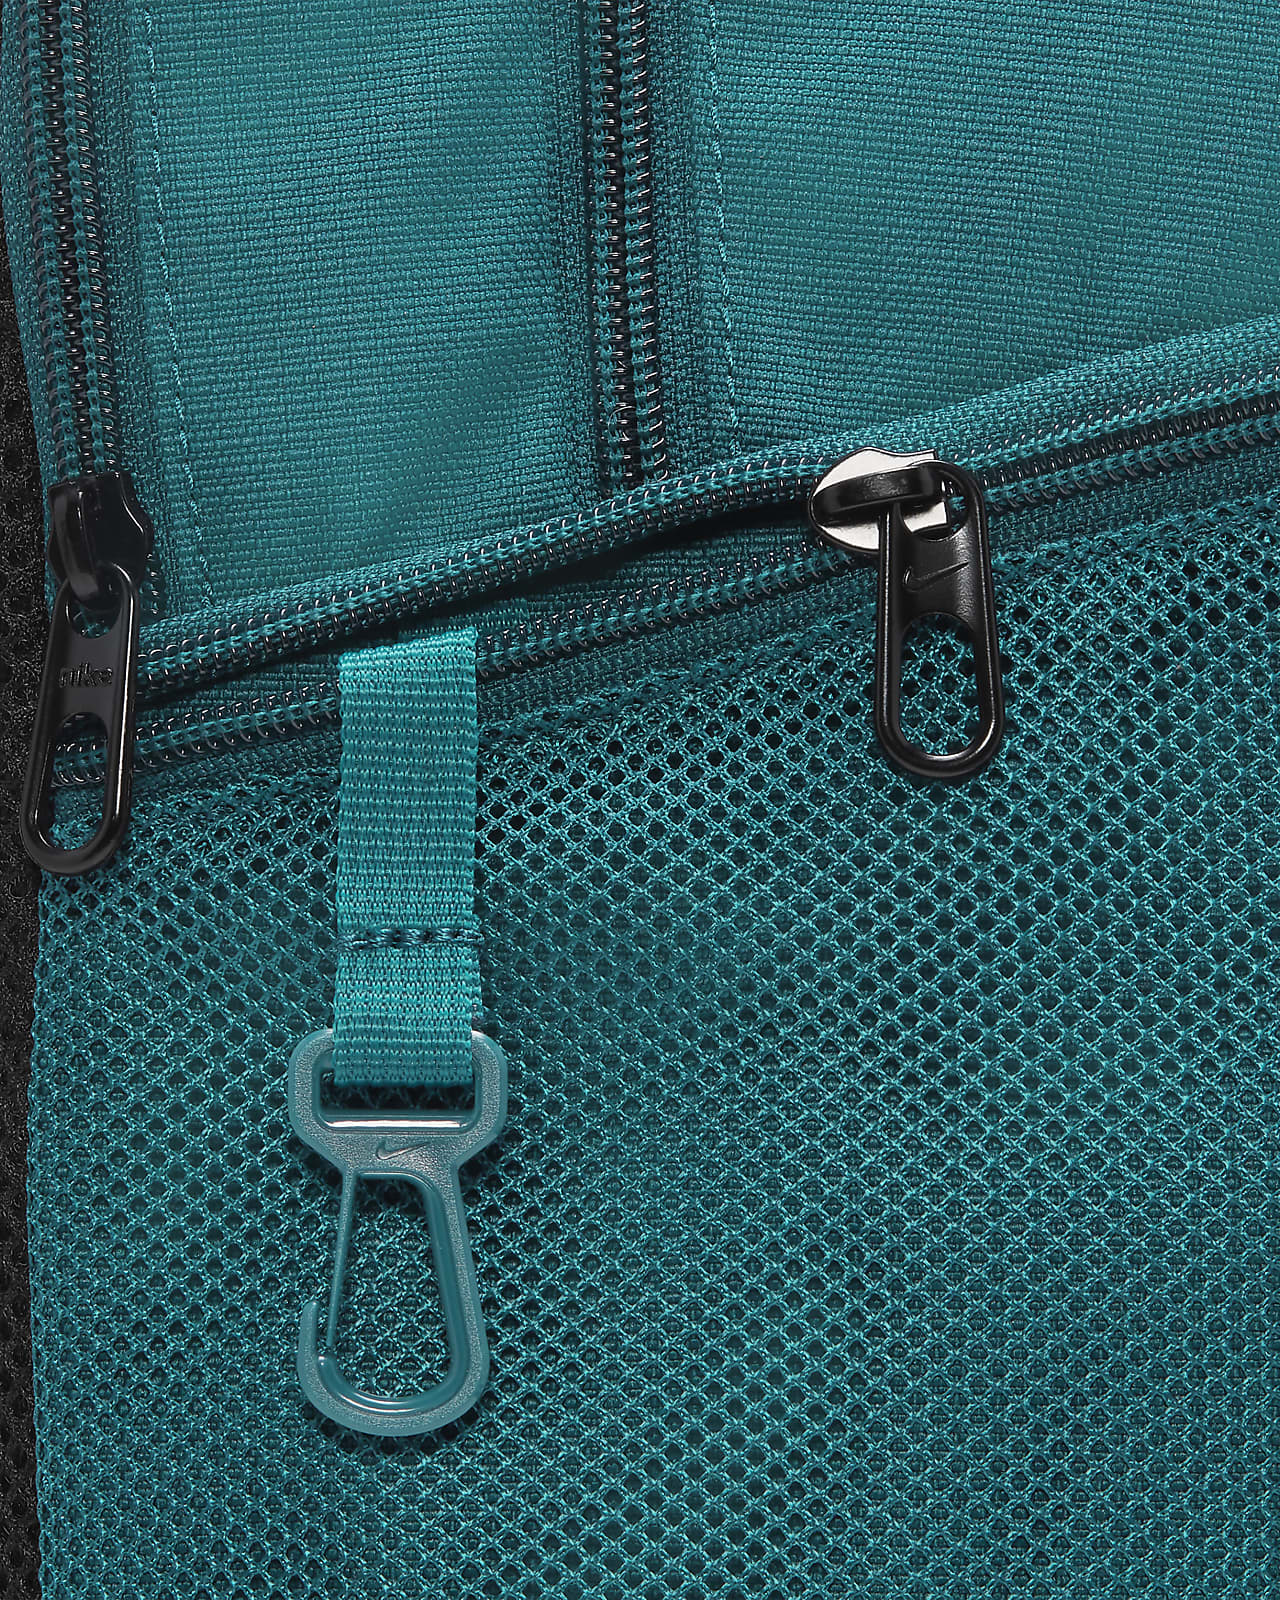 Unboxing/Reviewing The Nike Brasilia 9.5 Geode Teal/Black/Sundial Backpack  (On Body) 